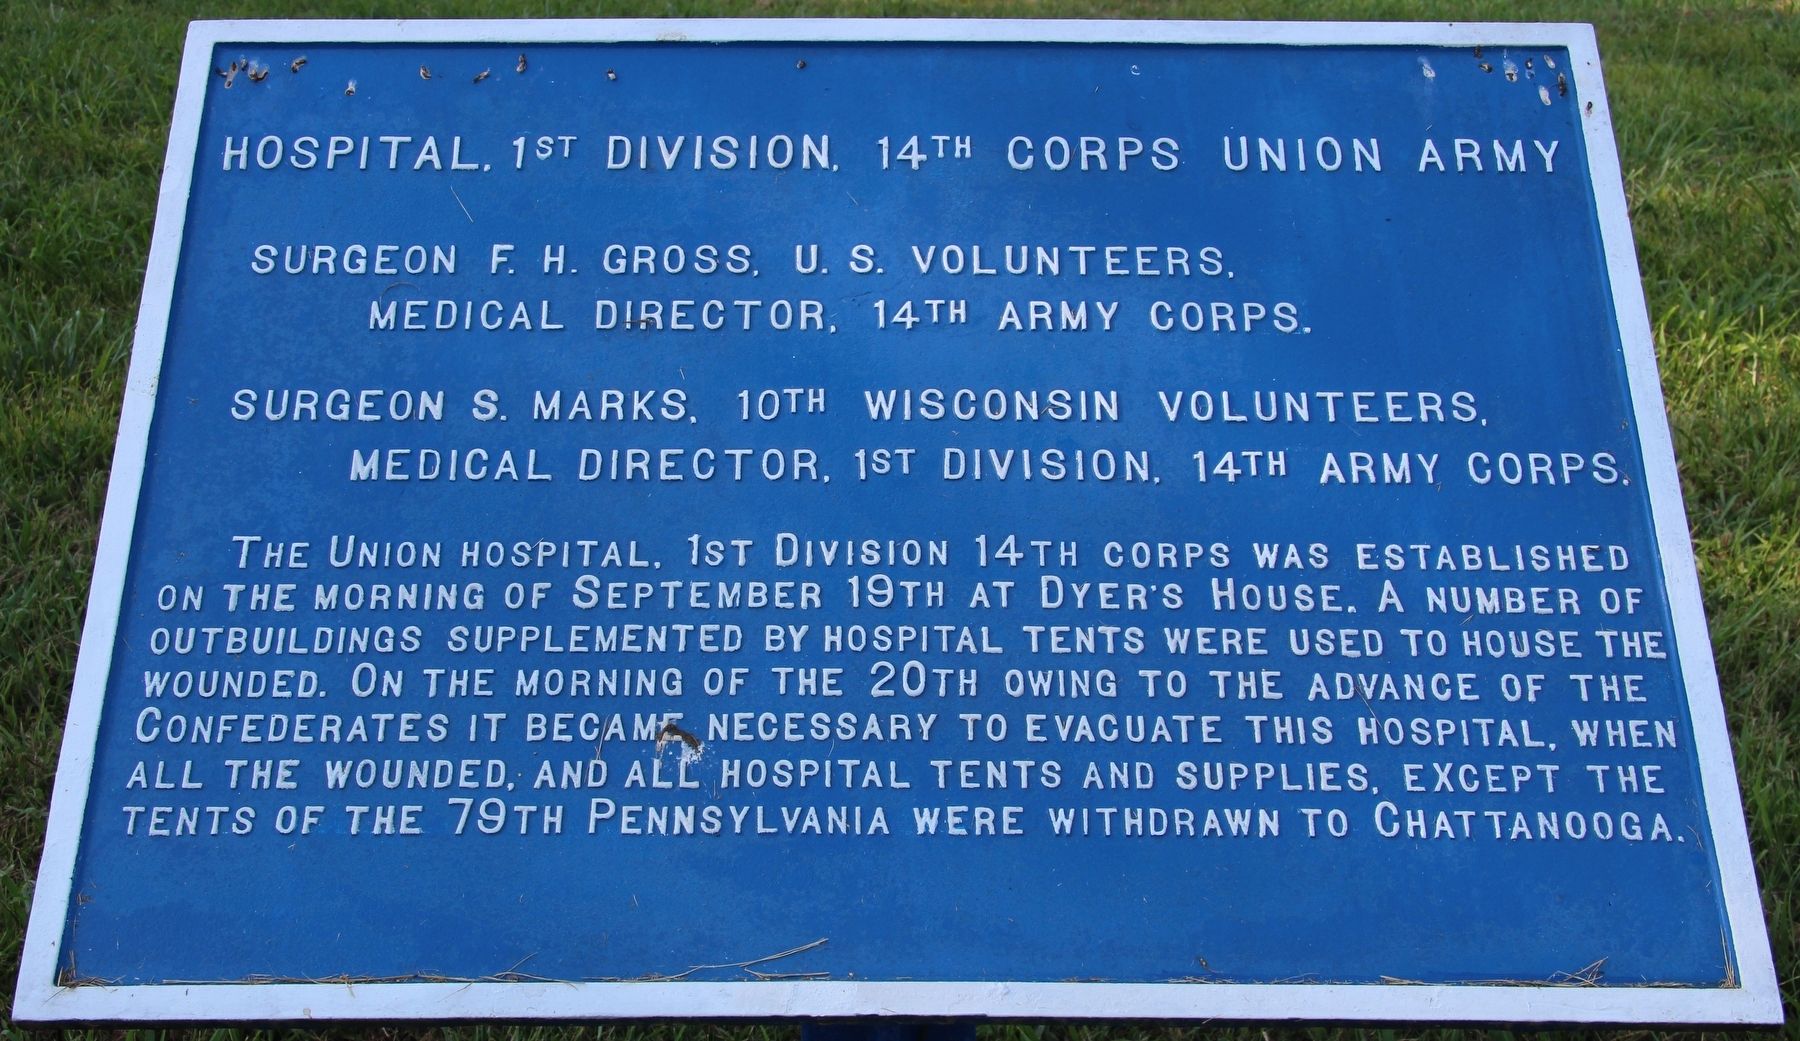 Hospital, 1st Division, 14th Corps Union Army Marker image. Click for full size.